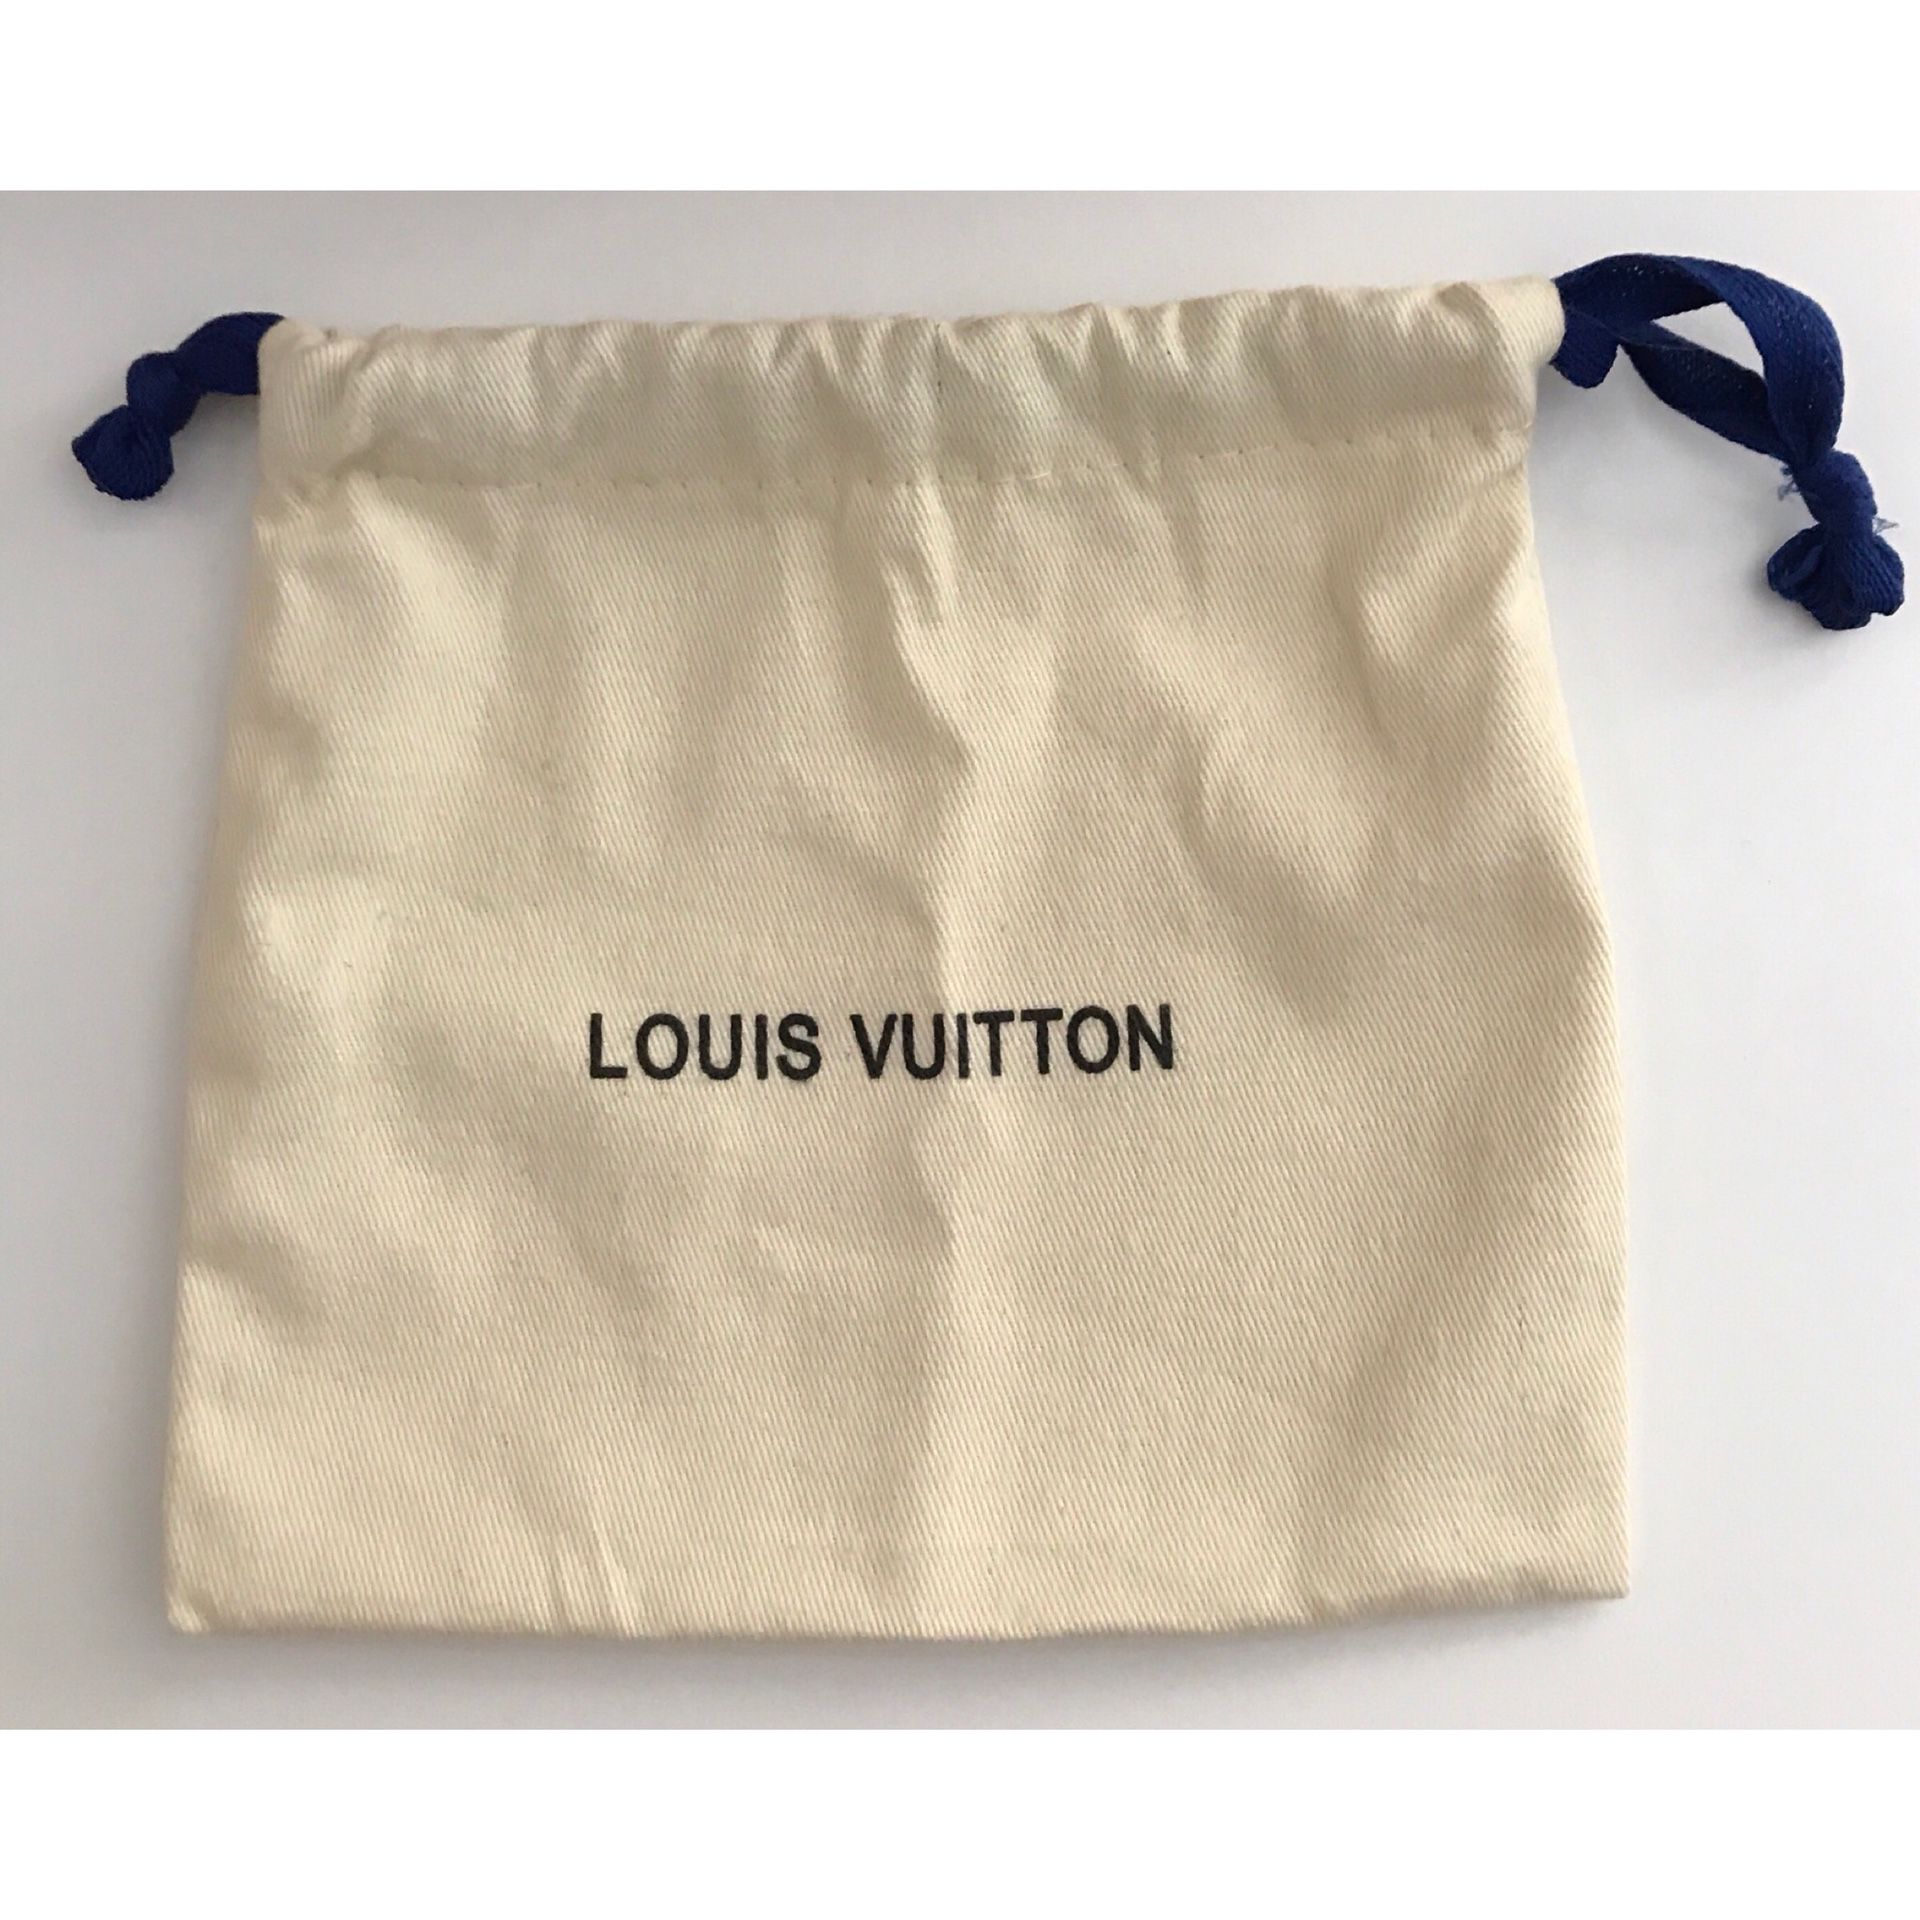 LV Belt Dust Bag And Box for Sale in Mount Oliver, PA - OfferUp